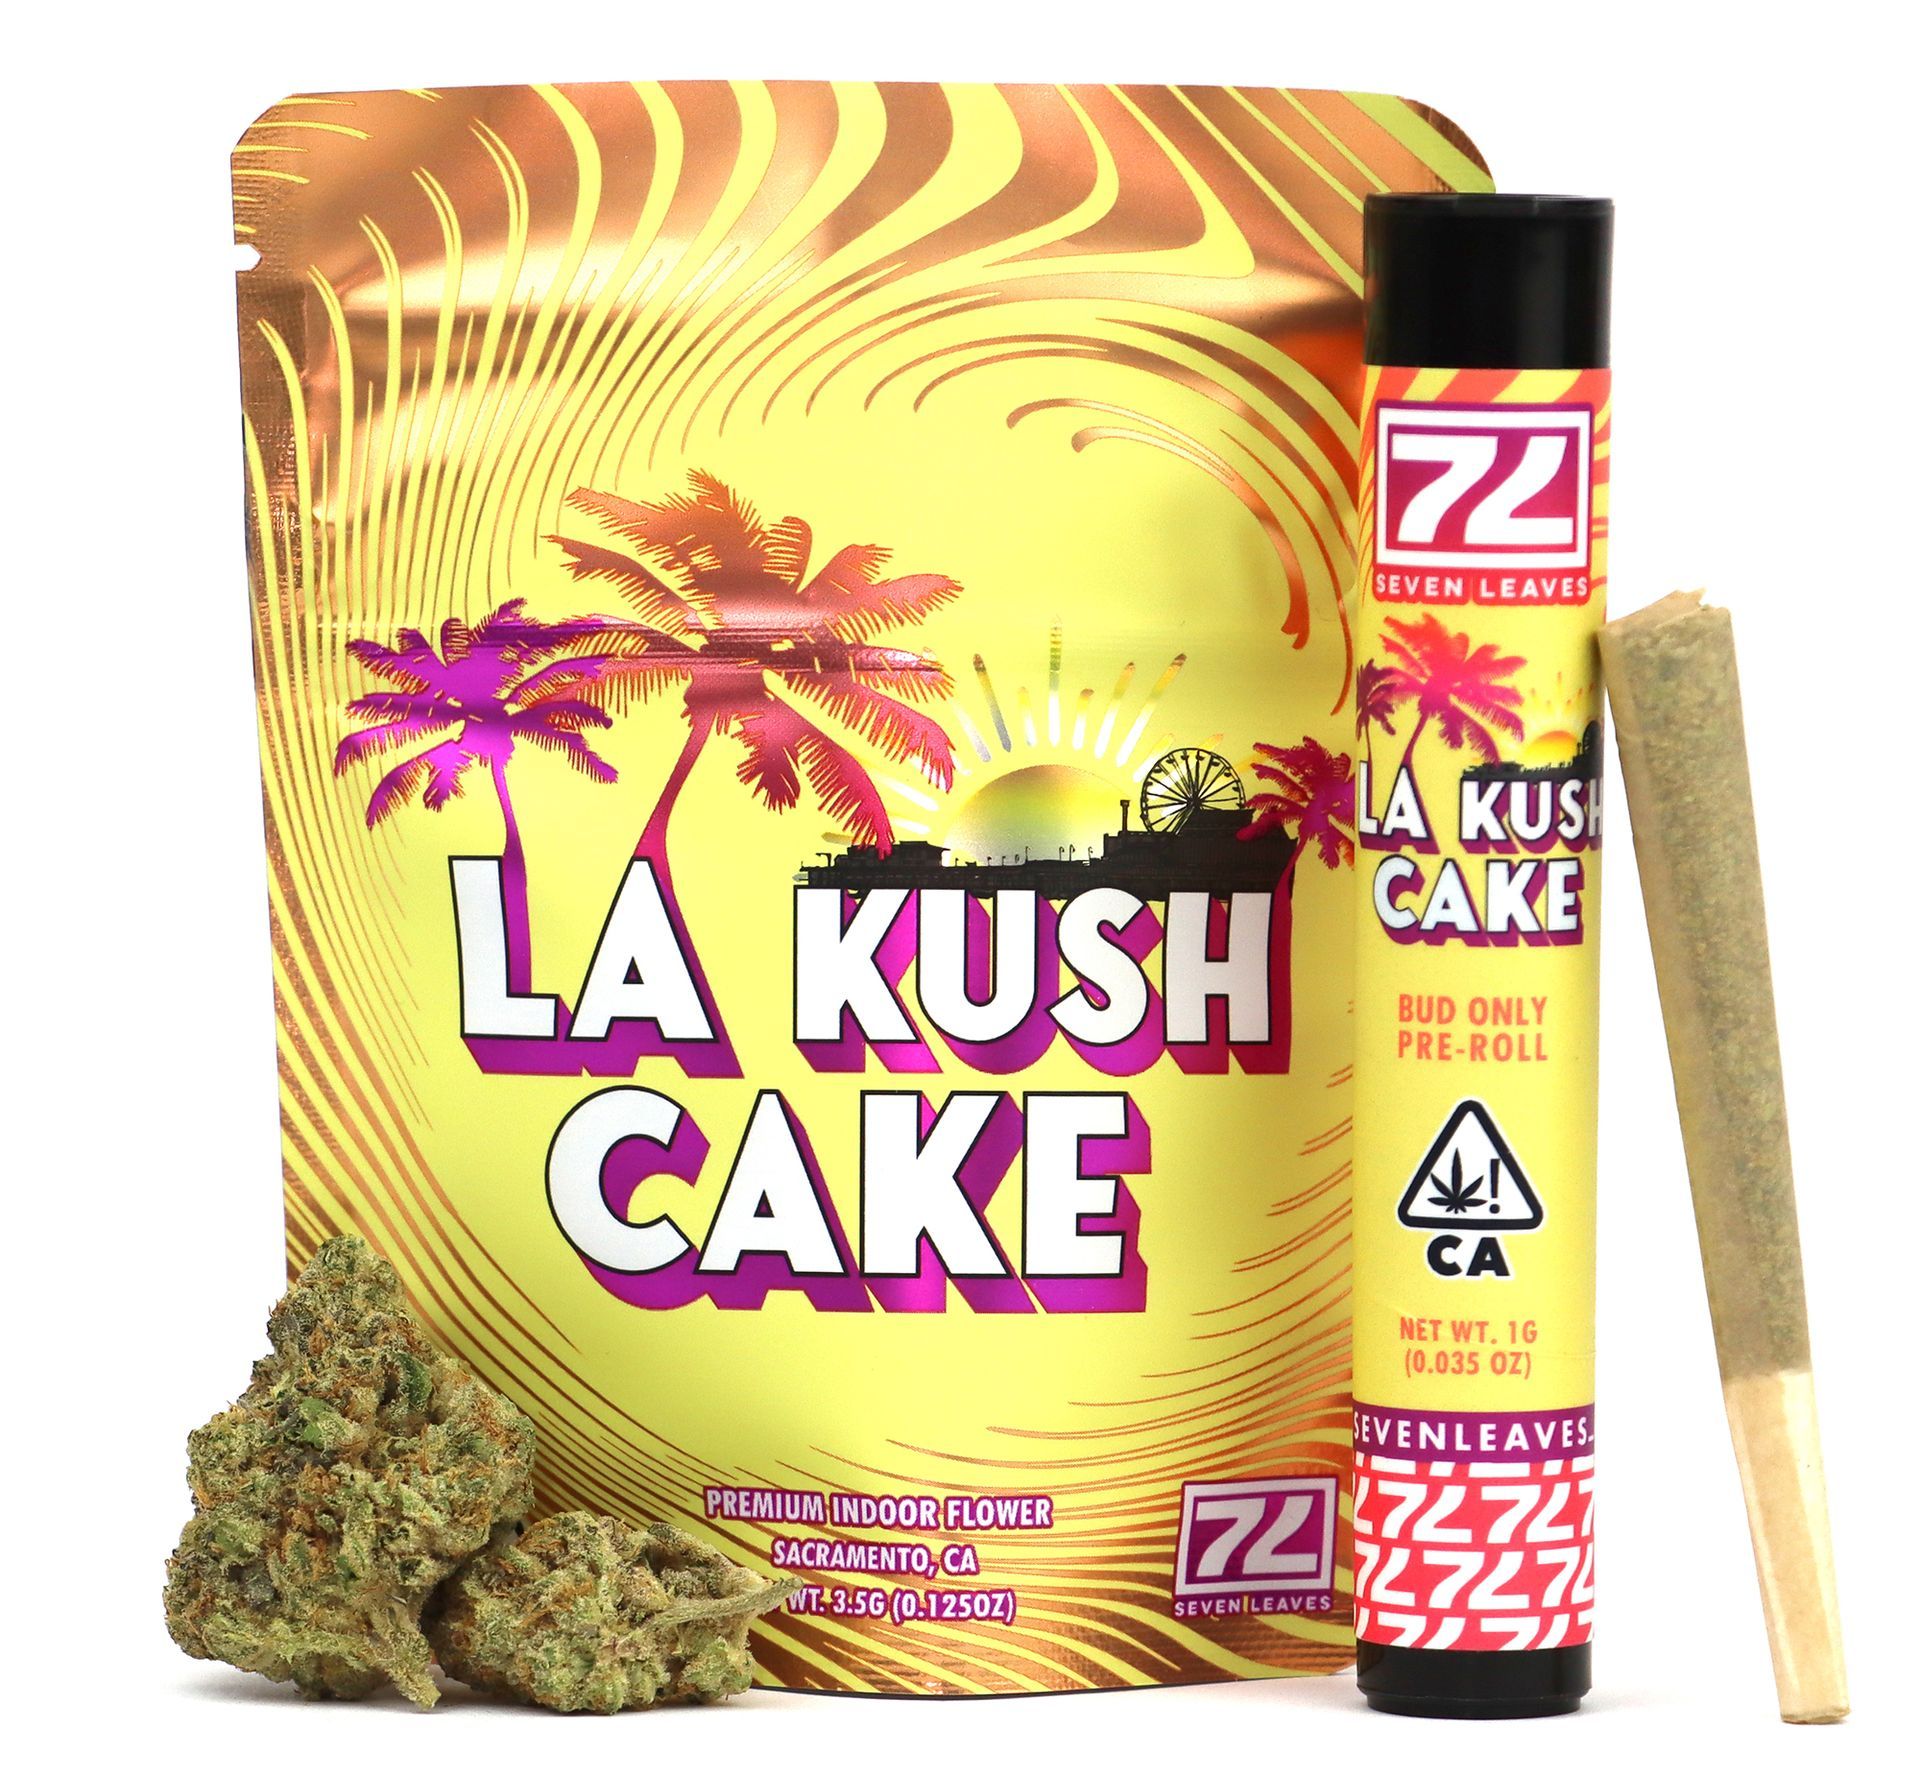 la kush cake packaging spread with preroll and weed next to it